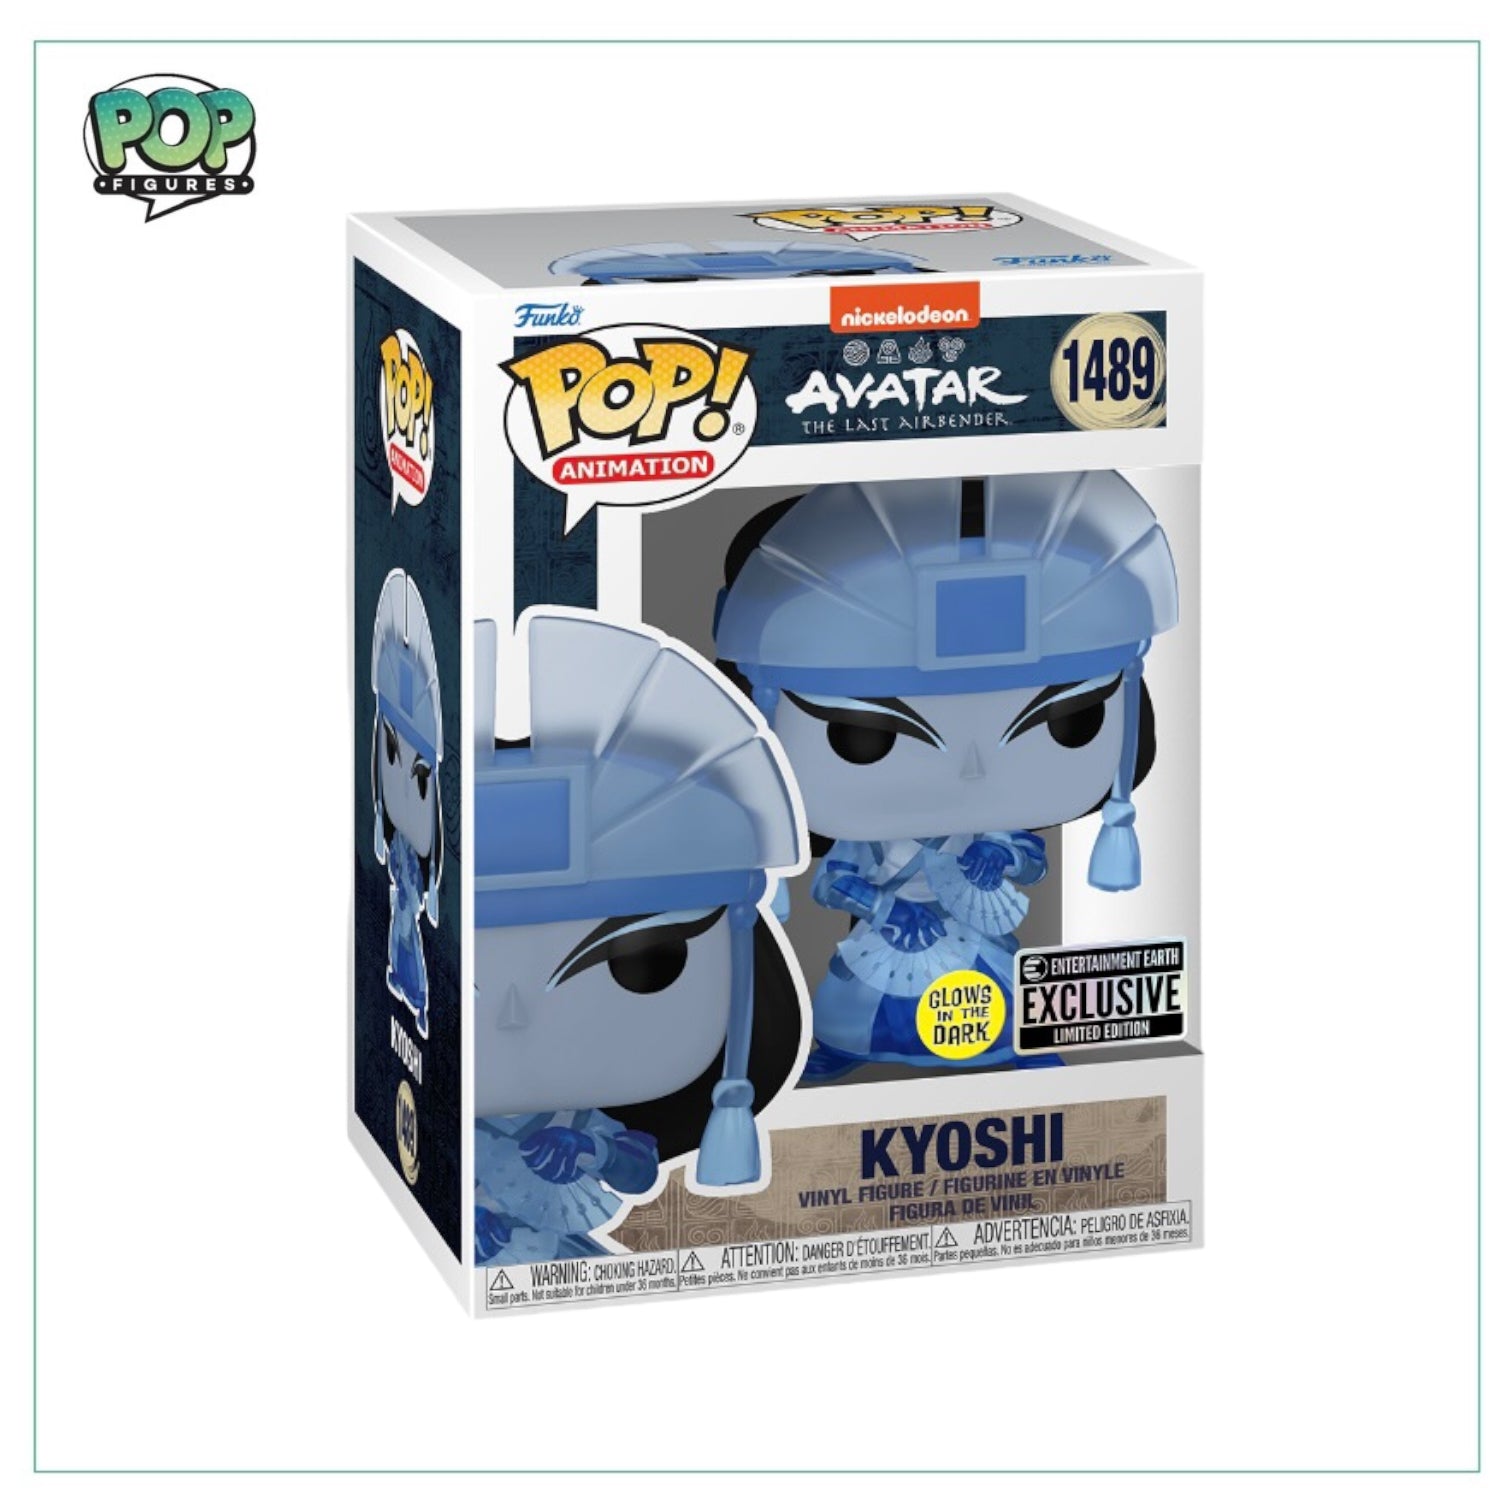 Kyoshi #1489 (Glow in the Dark) Funko Pop! - Avatar the Last Airbender - Entertainment Earth Exclusive